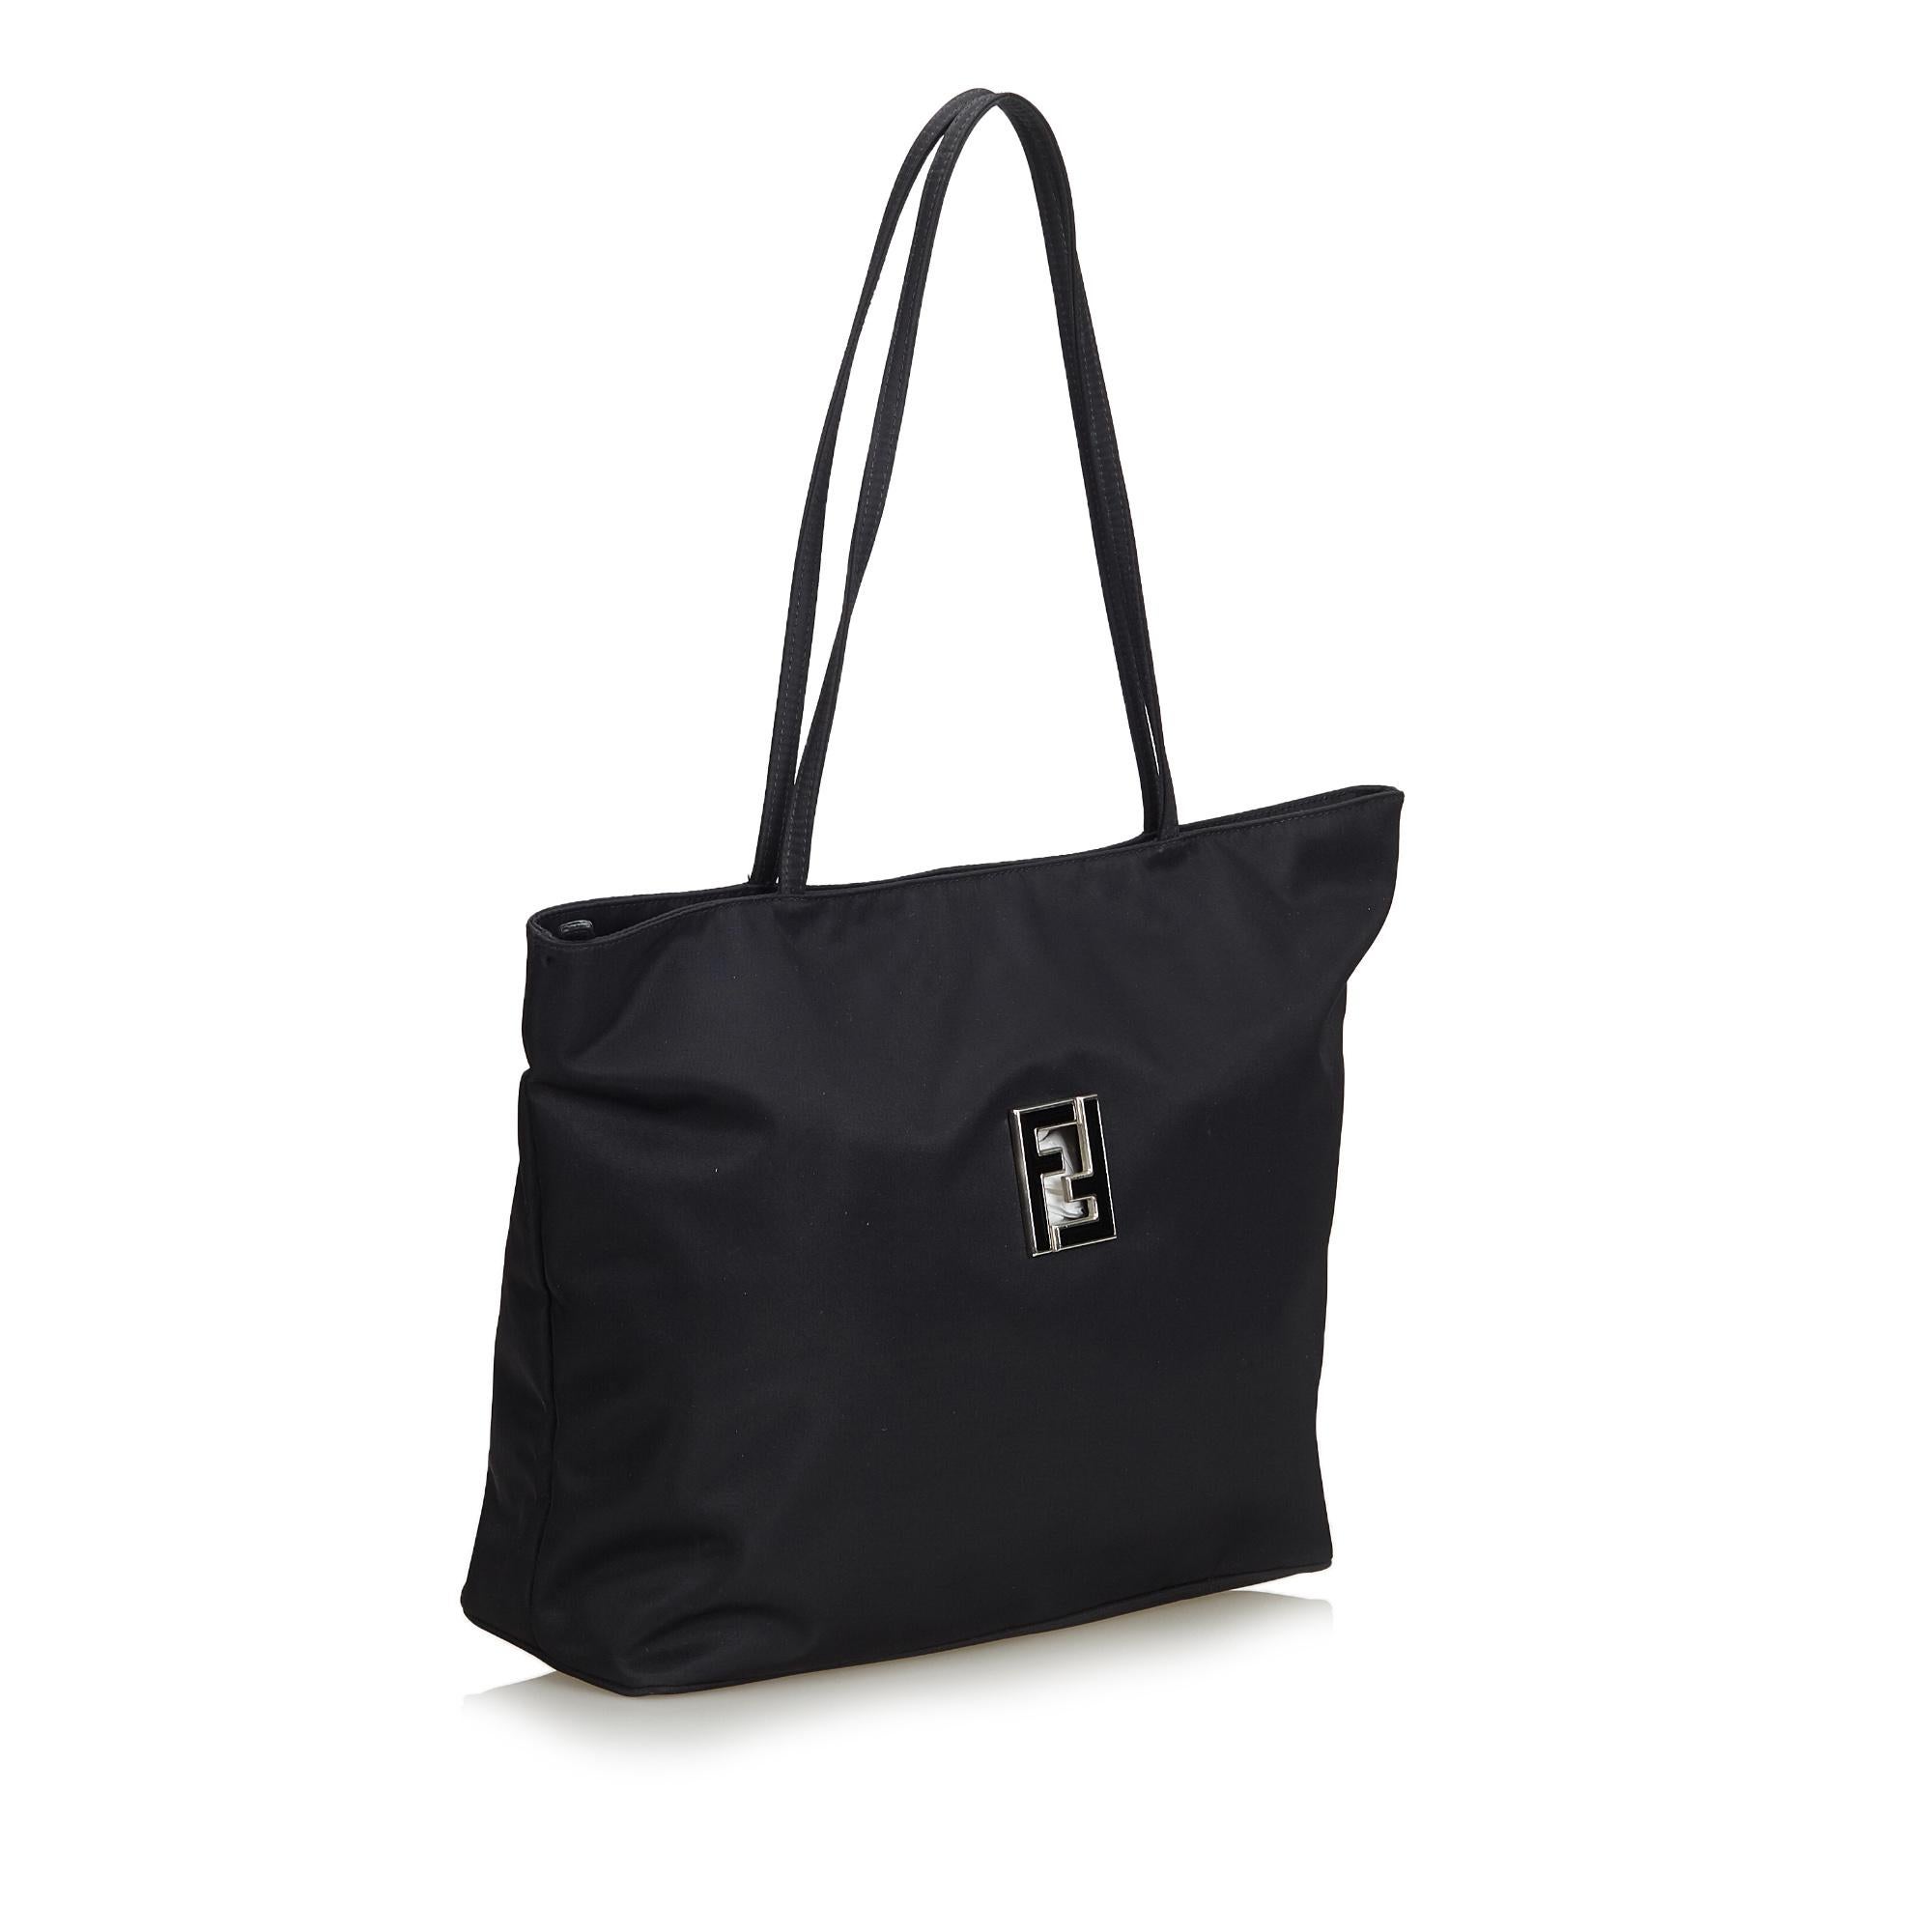 This tote bag features a nylon body, flat straps, top zip closure, exterior zip pocket and interior zip pocket. It carries as B+ condition rating.

Inclusions: 
Dust Bag

Dimensions:
Length: 30.00 cm
Width: 42.00 cm
Depth: 12.00 cm
Shoulder Drop: